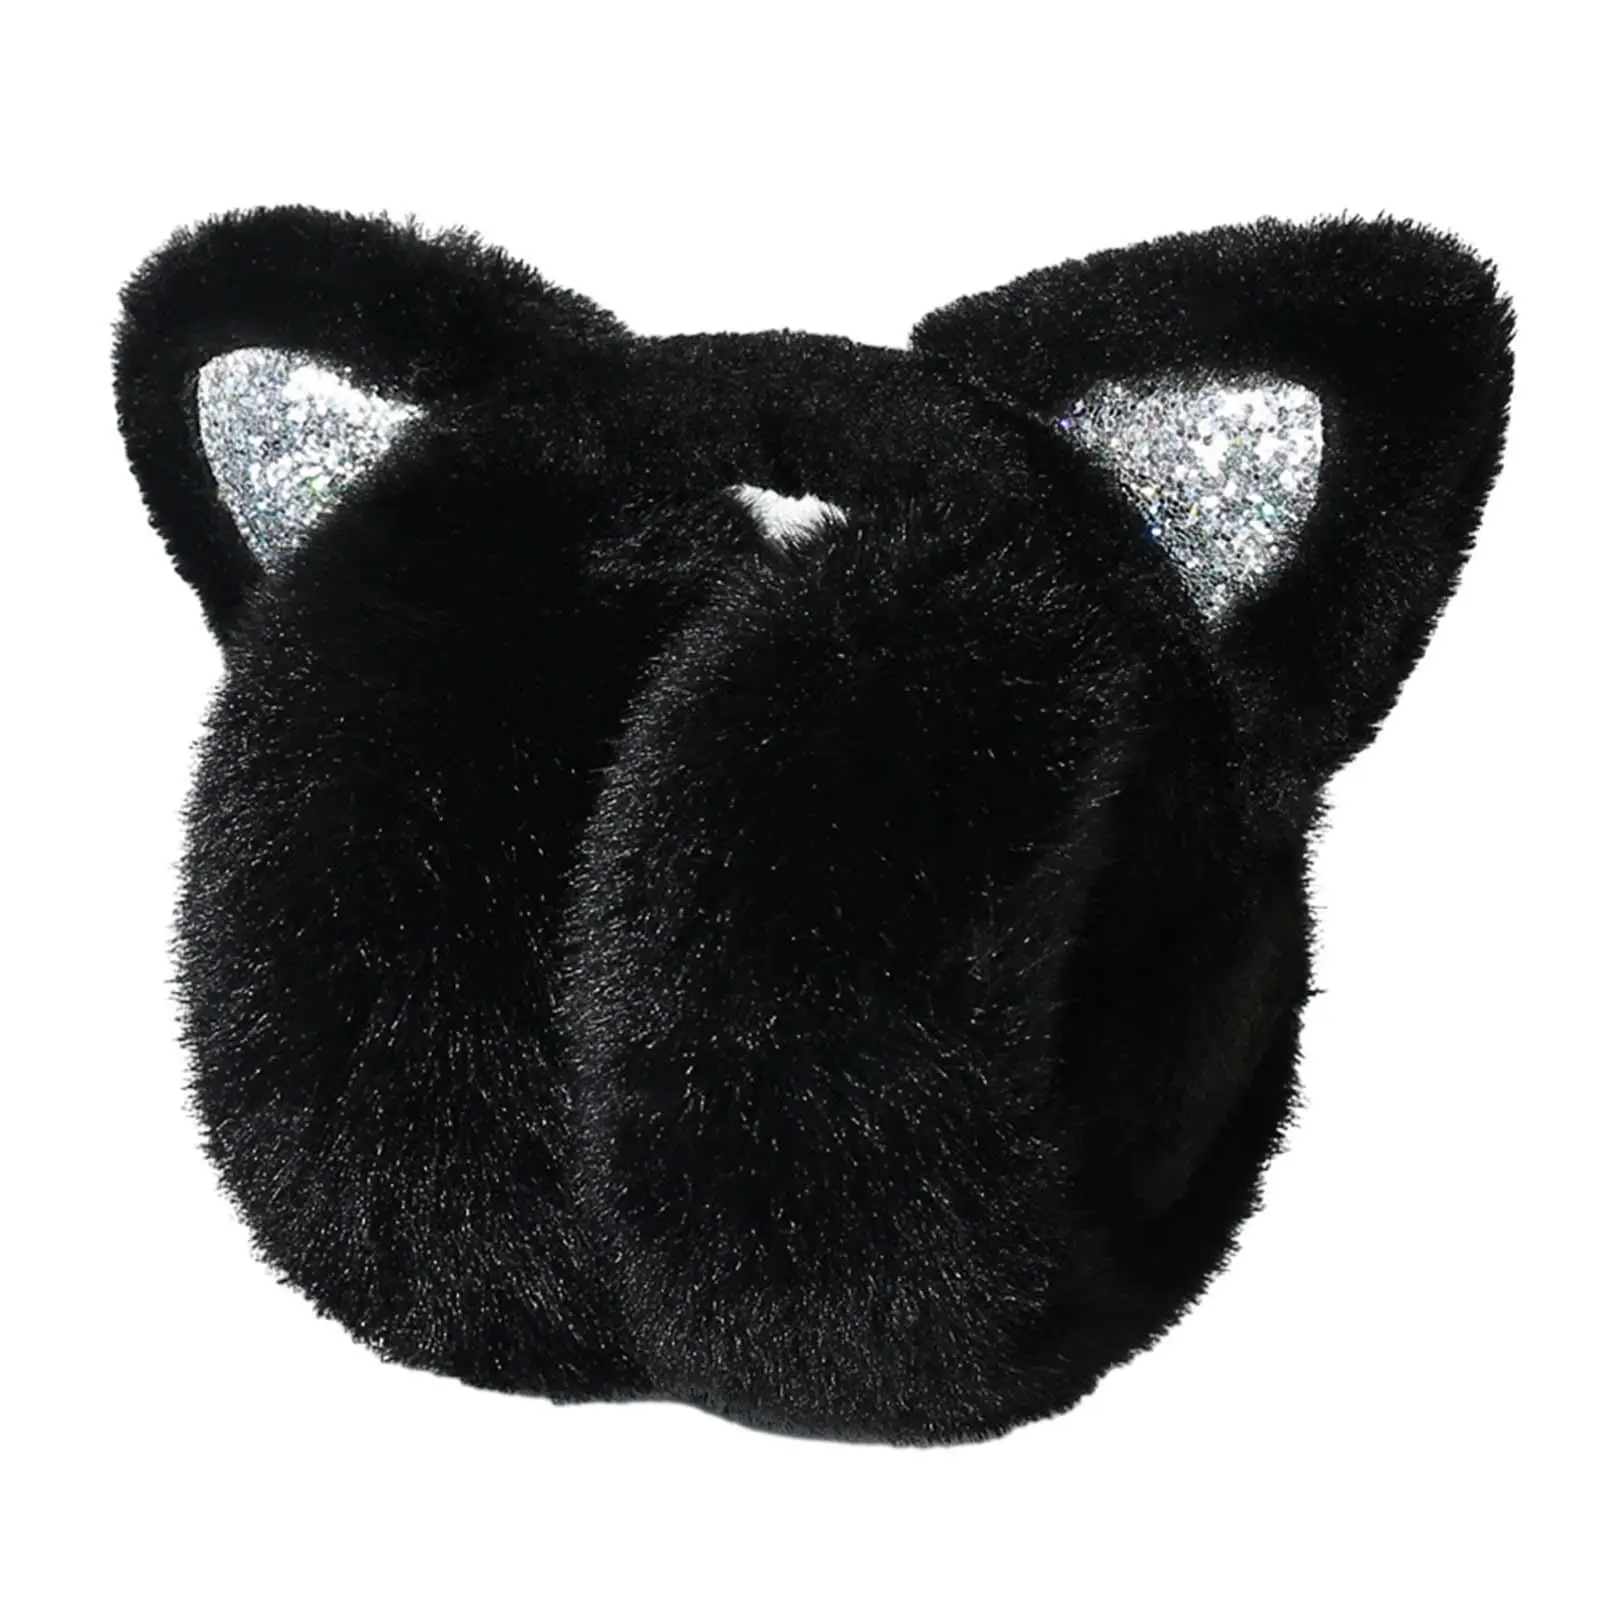 Ear Warmers Premium Folded Women Comfortable Winter Ear Muffs Earmuffs Ear Cover for Skating Cycling Cold Weather Outdoor Skiing